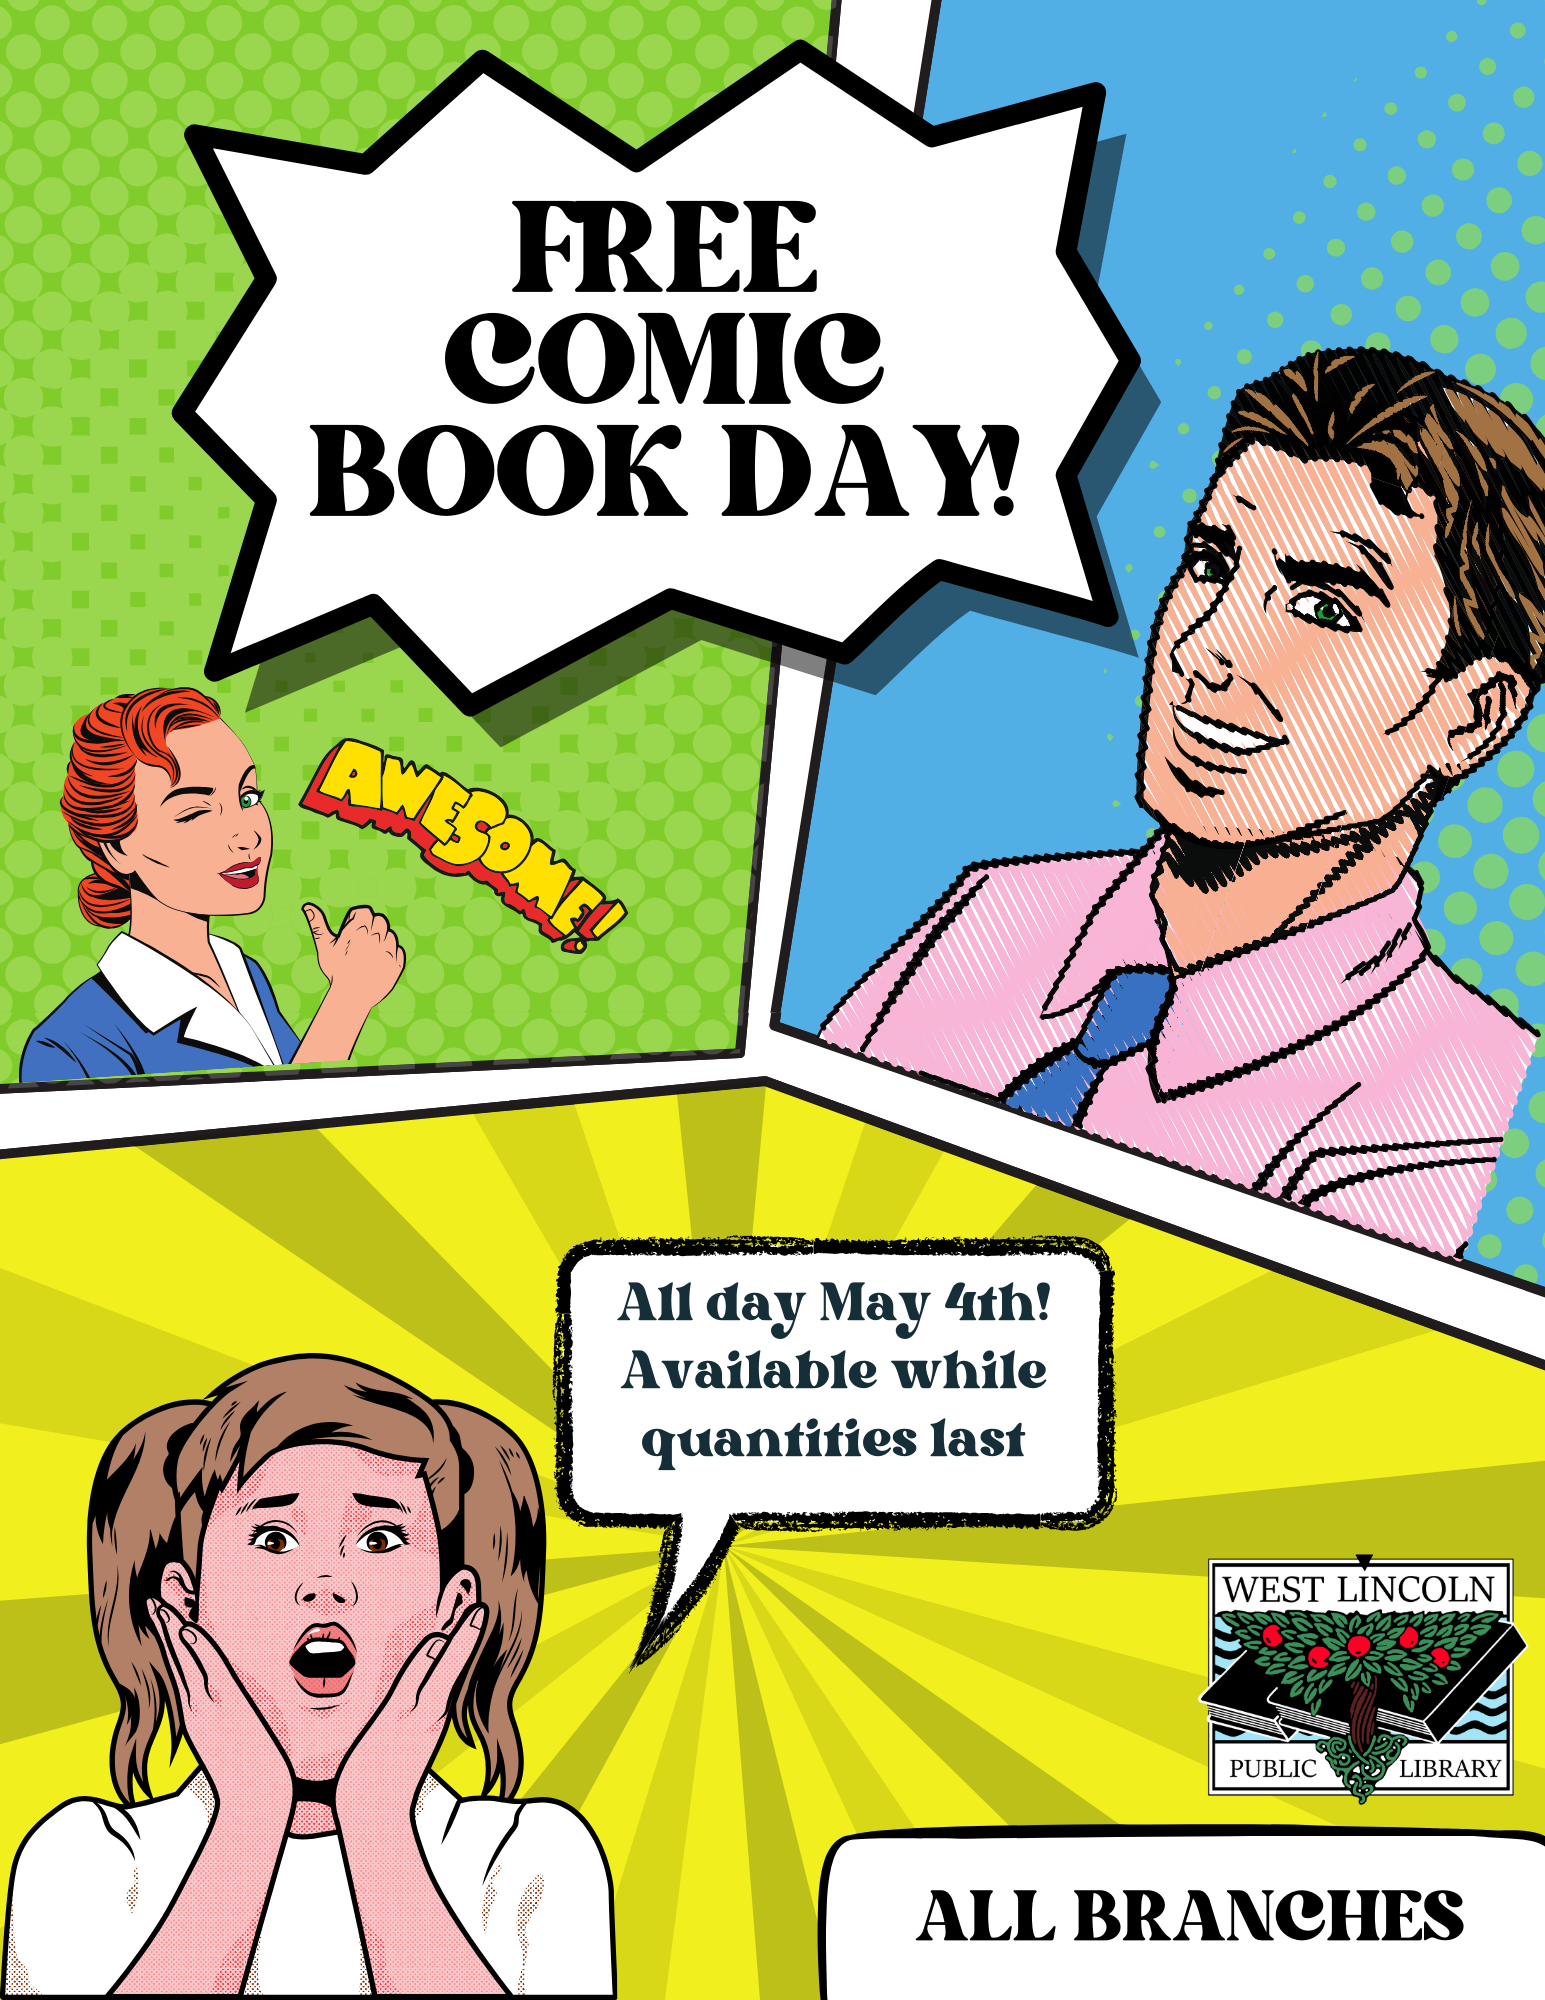 Poster for Free Comic Book Day, All Day May 4th! Available while quantities last. All Branches